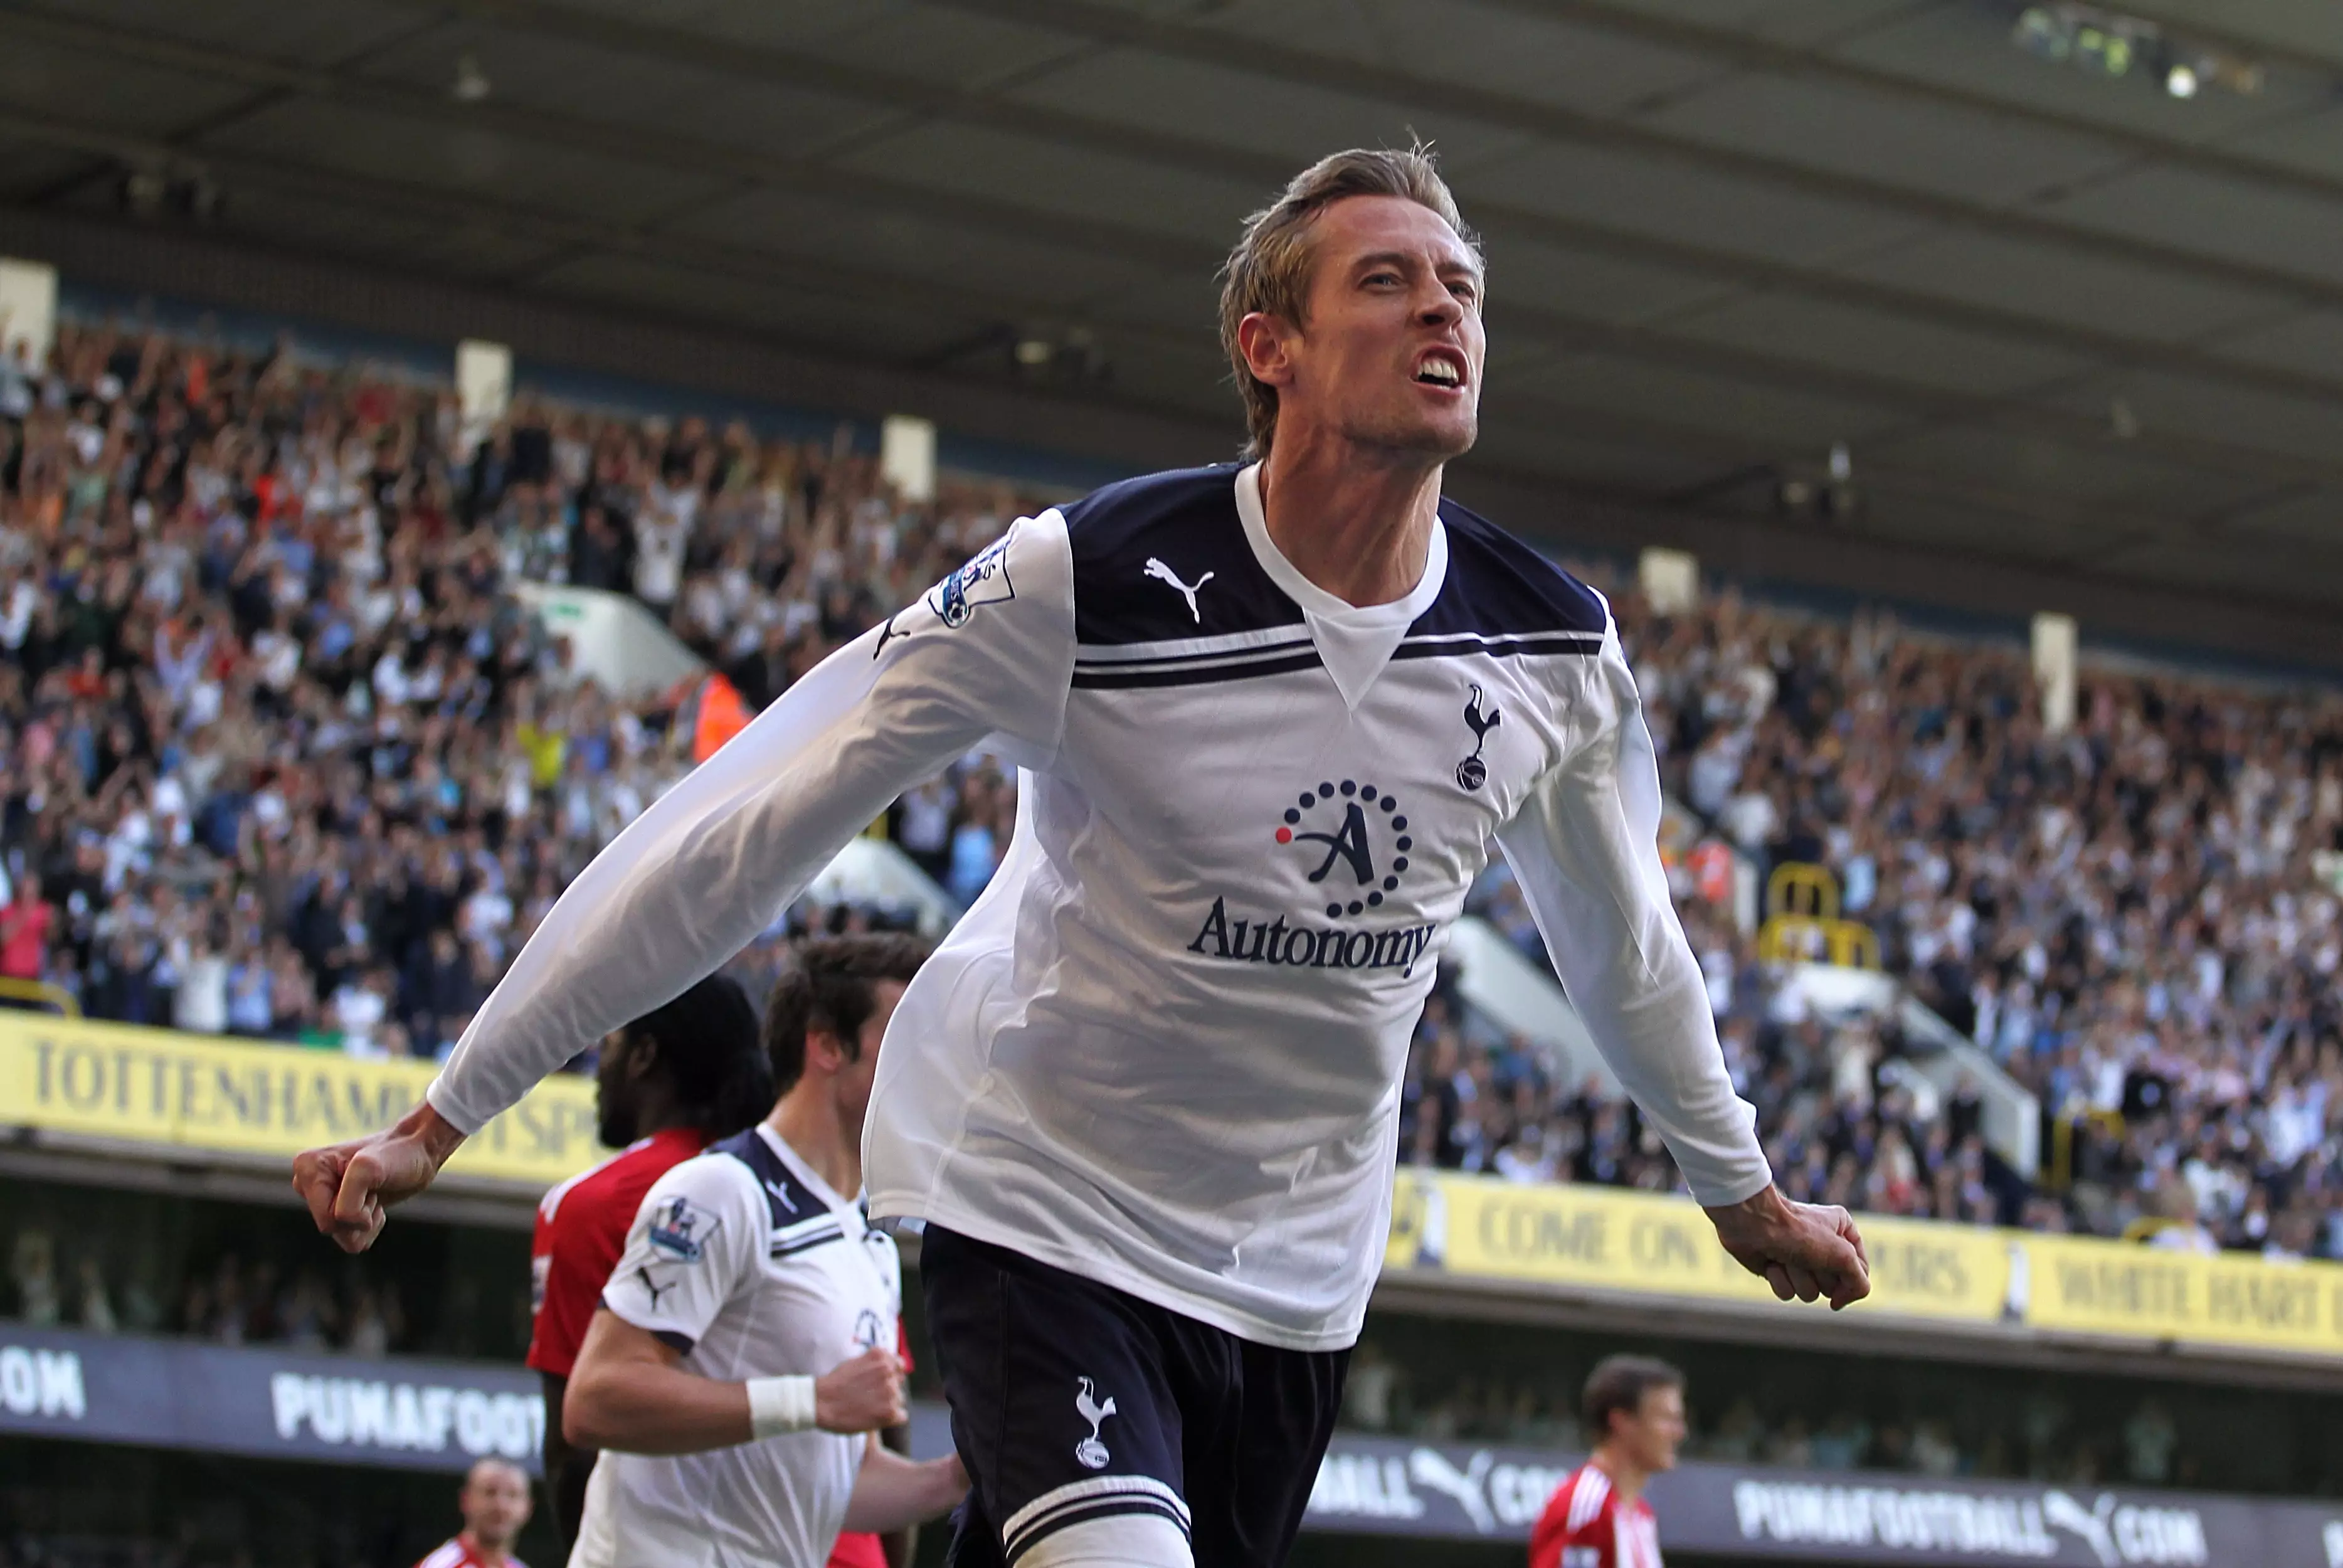 Peter Crouch enjoyed a stellar career in the Premier League with Tottenham and Liverpool among other clubs